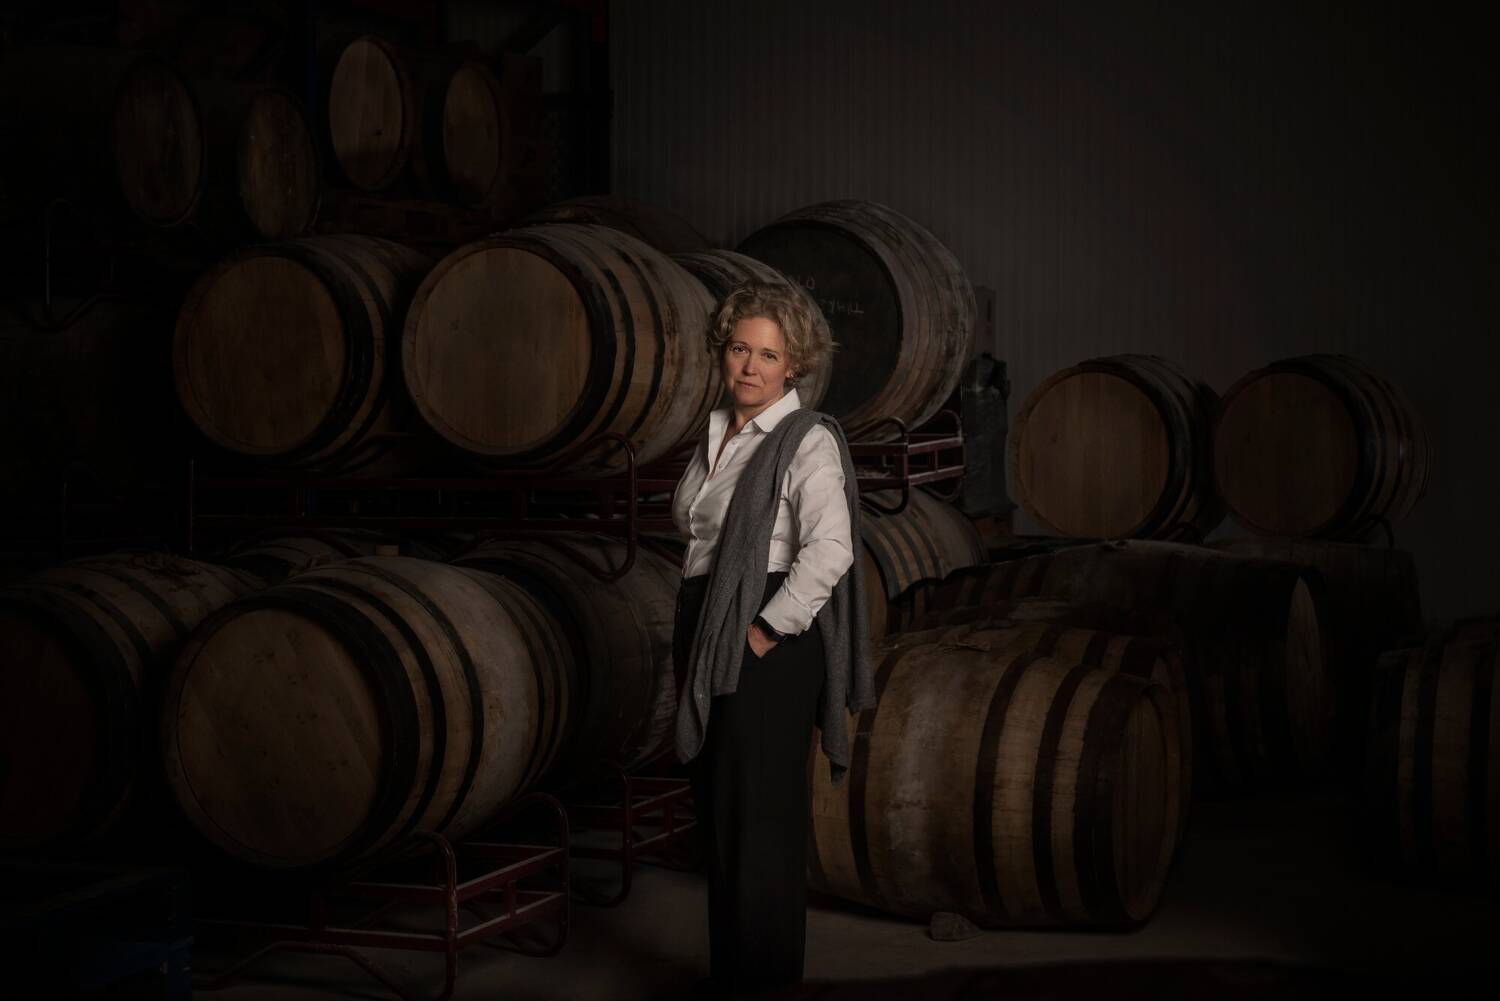 A woman is standing in front of a number of whisky barrels stored on their side.